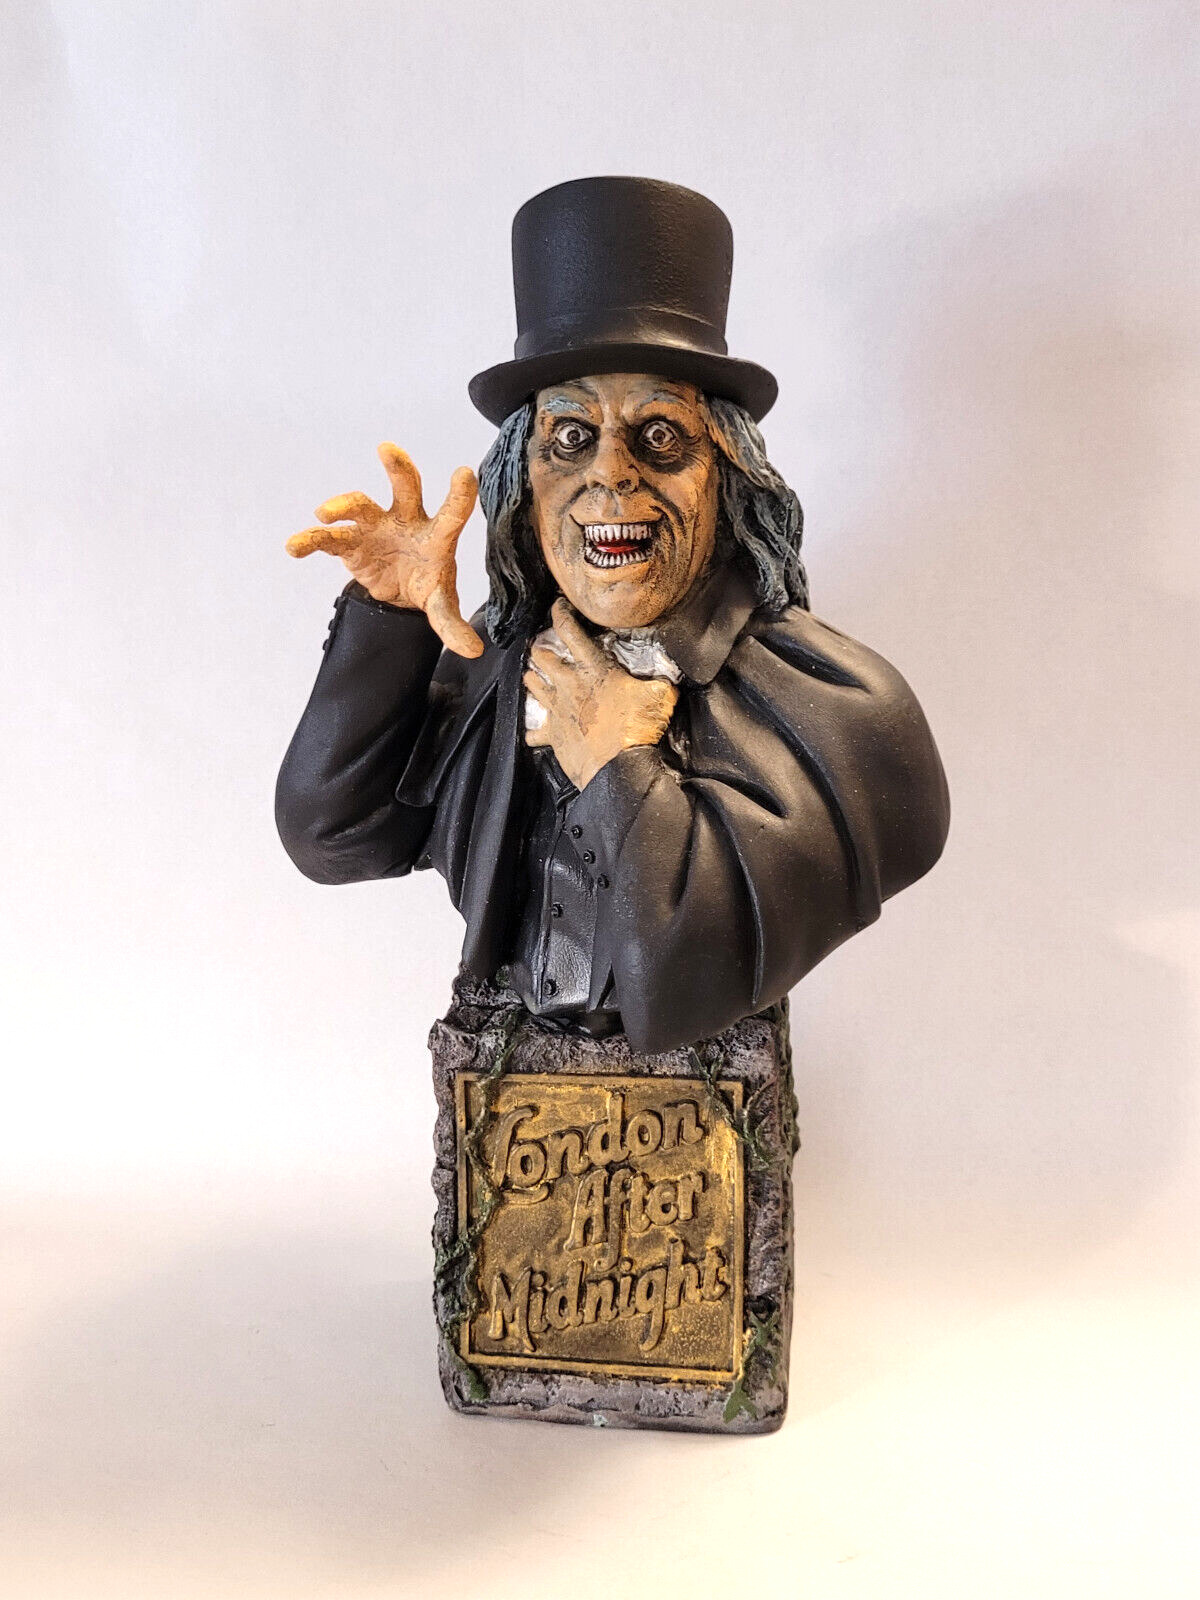 Hand painted London After Midnight bust